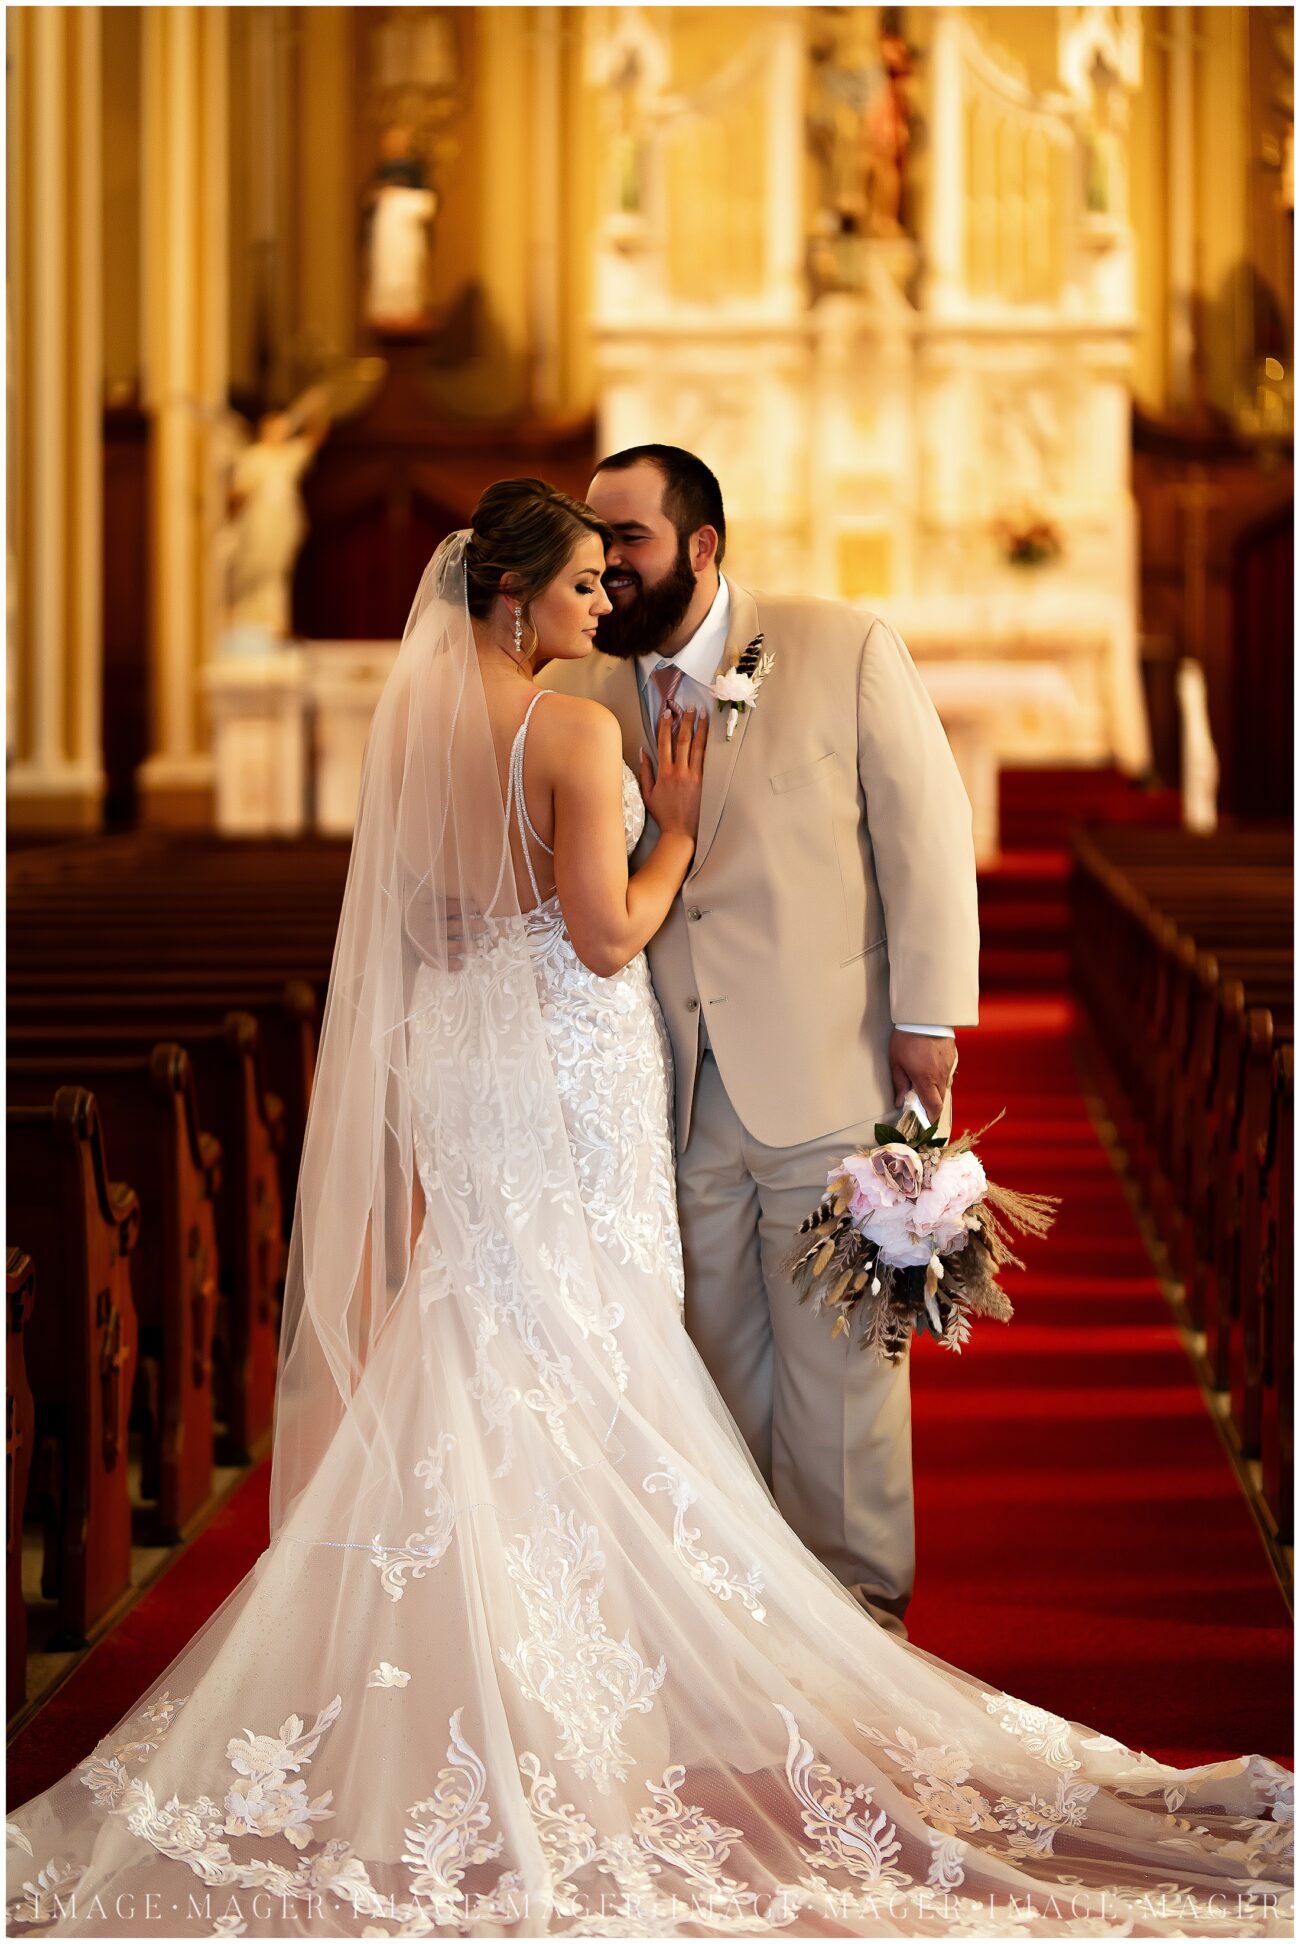 A small town wedding for Casey and Adam. A close-up portrait of the bride and groom in the church showing off the back of the bride's dress.

Saint John the Baptist Catholic Church, L'erable, IL. 

Photo taken by Mager Image Photography.